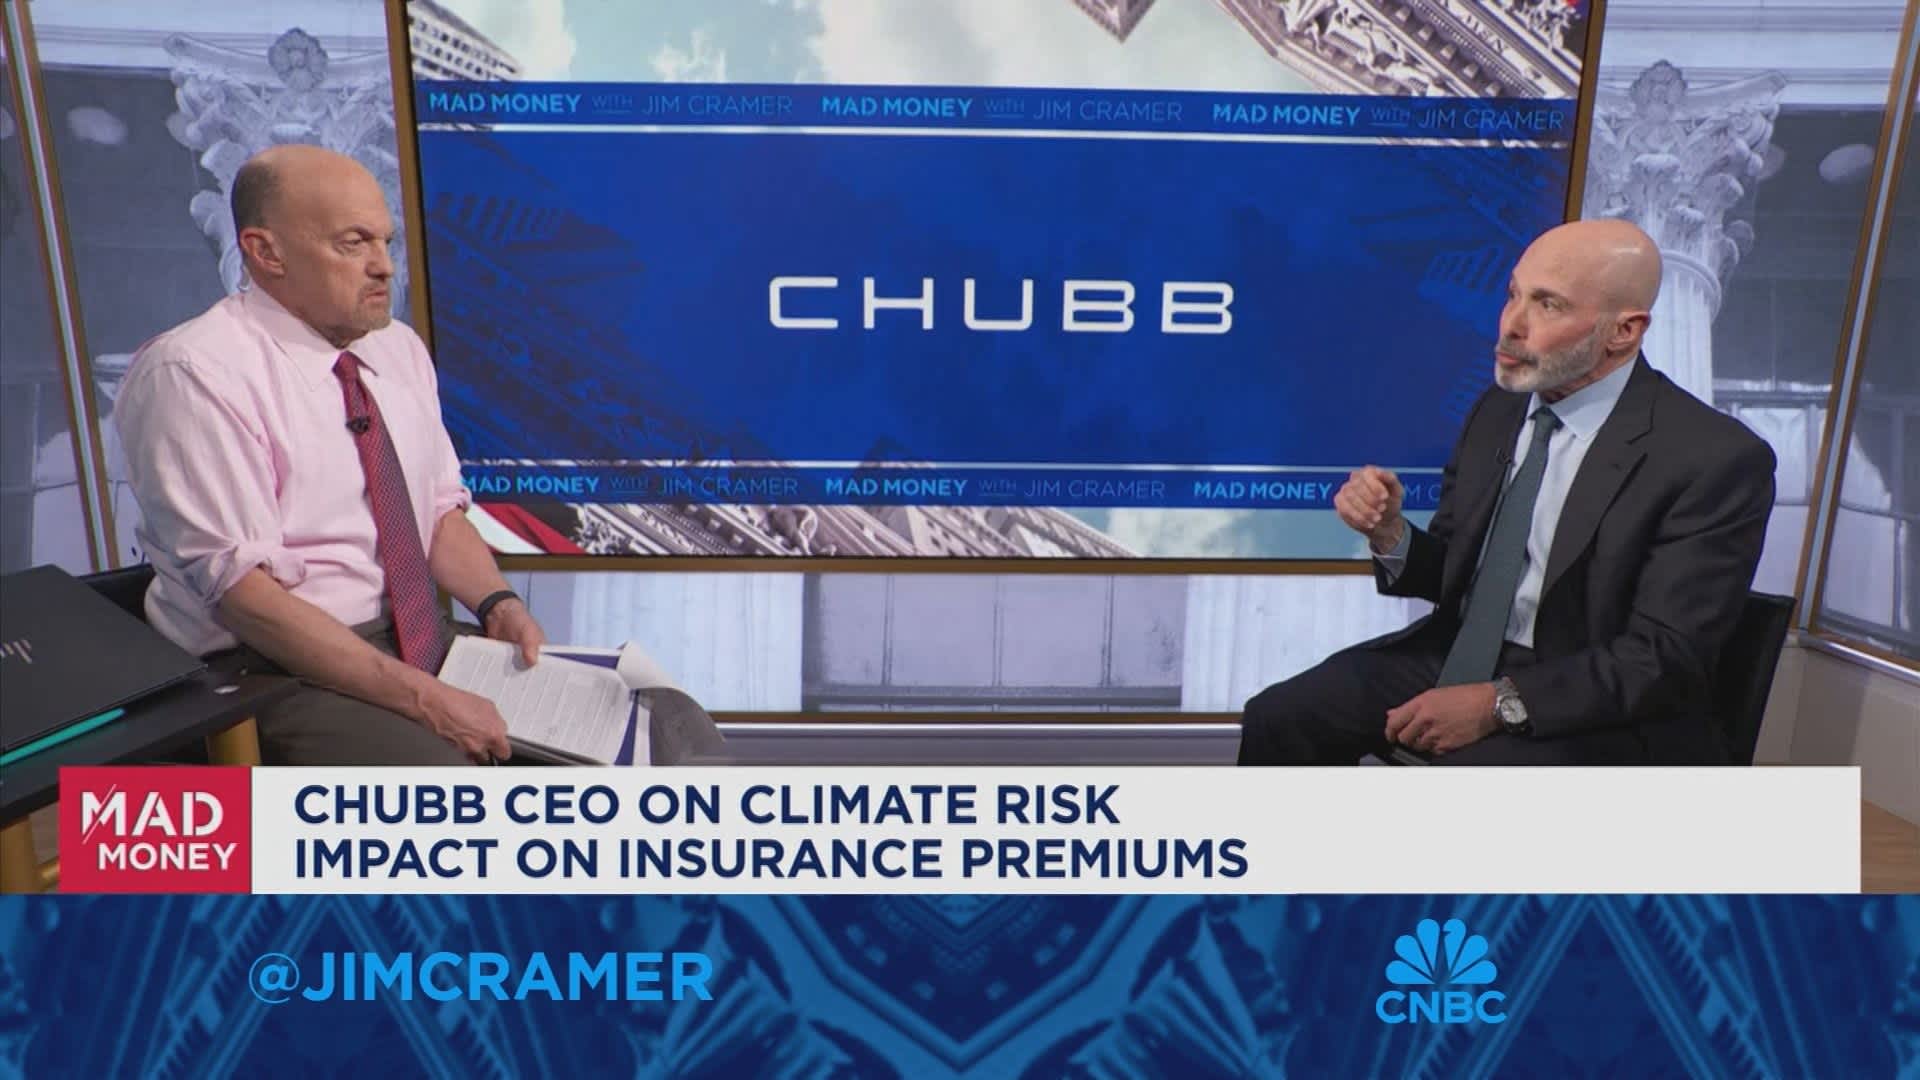 Climate change is creating volatility in the insurance space, says Chubb CEO Evan Greenberg